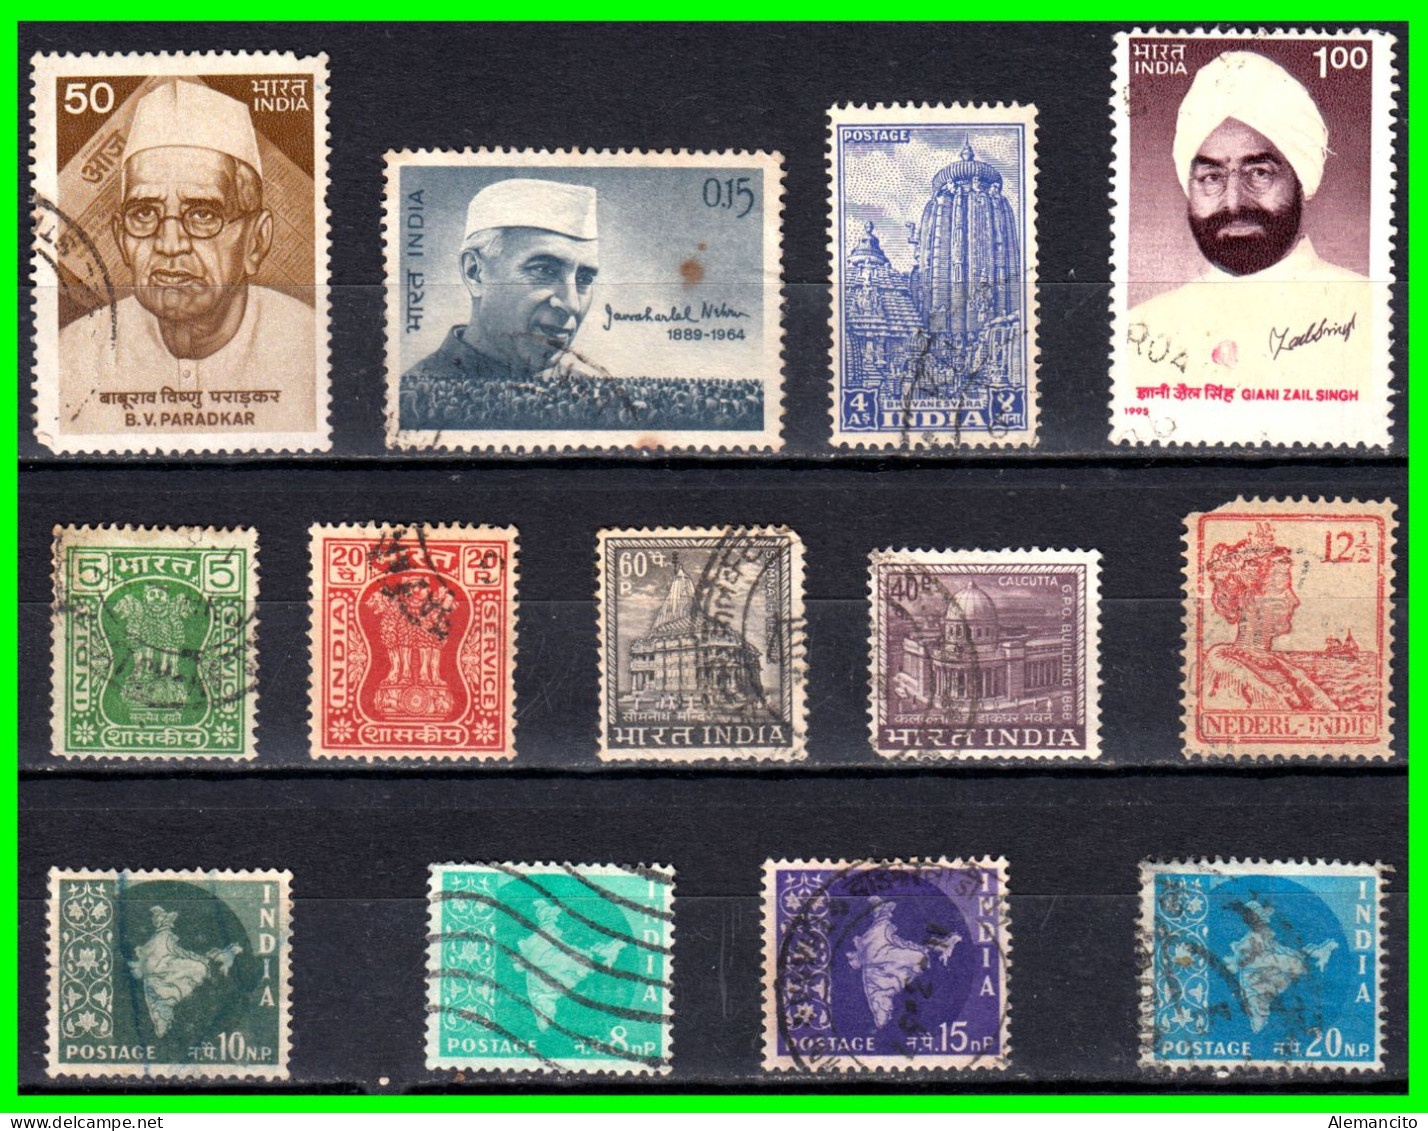 INDIA – ( ASIA ) – LOTE 13 SELLOS DIFERENTES AÑOS Y VALORES - Used Stamps